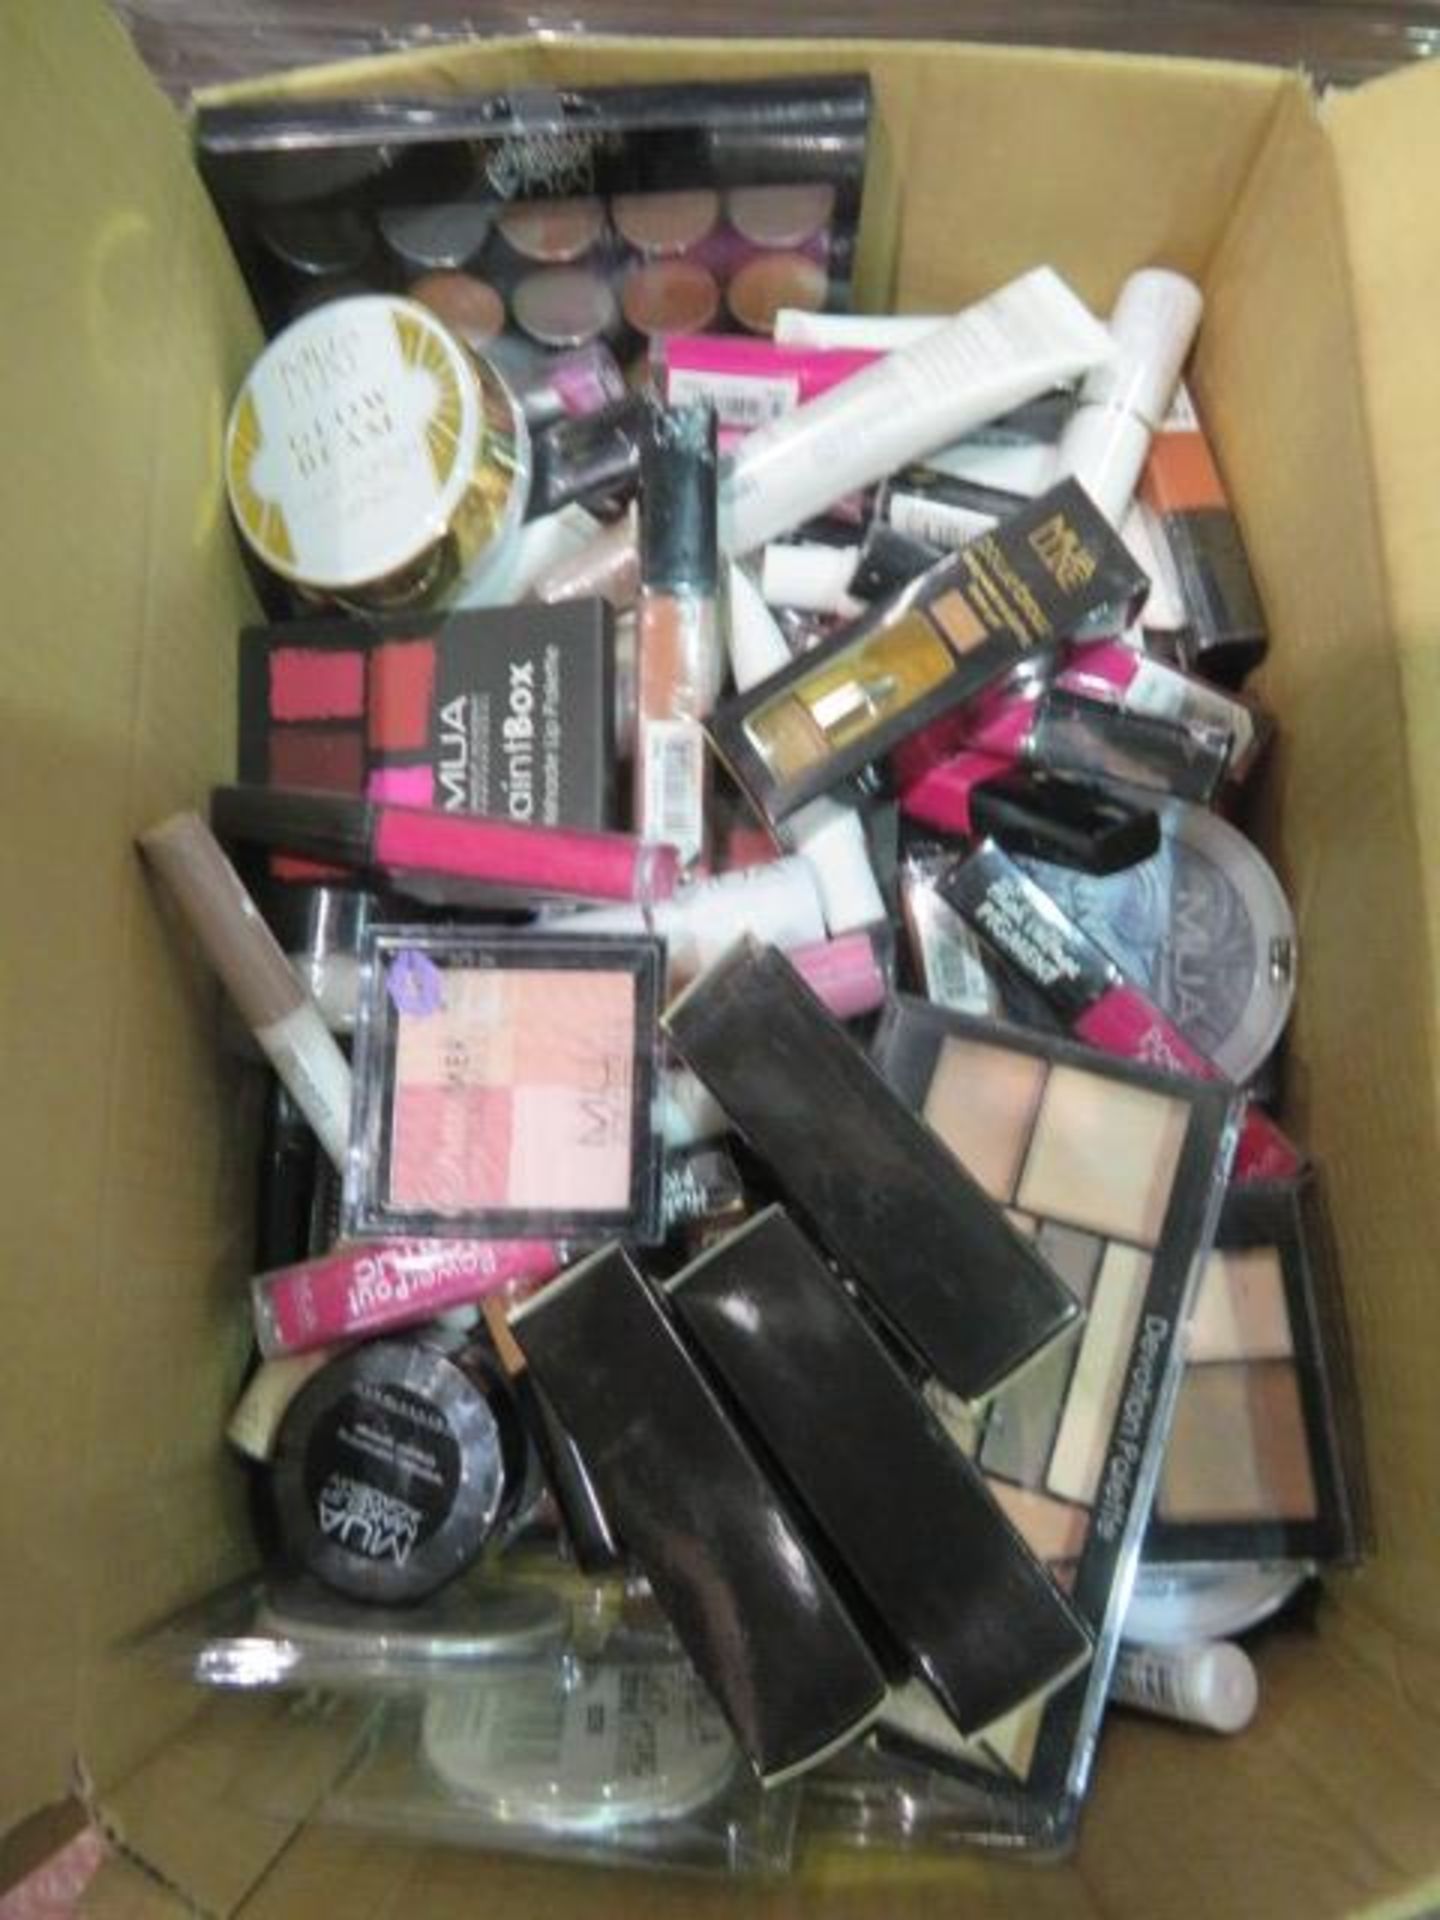 Circa. 200 items of various new make up acadamy make up to include: paintbox multishade lip palette, - Image 2 of 3